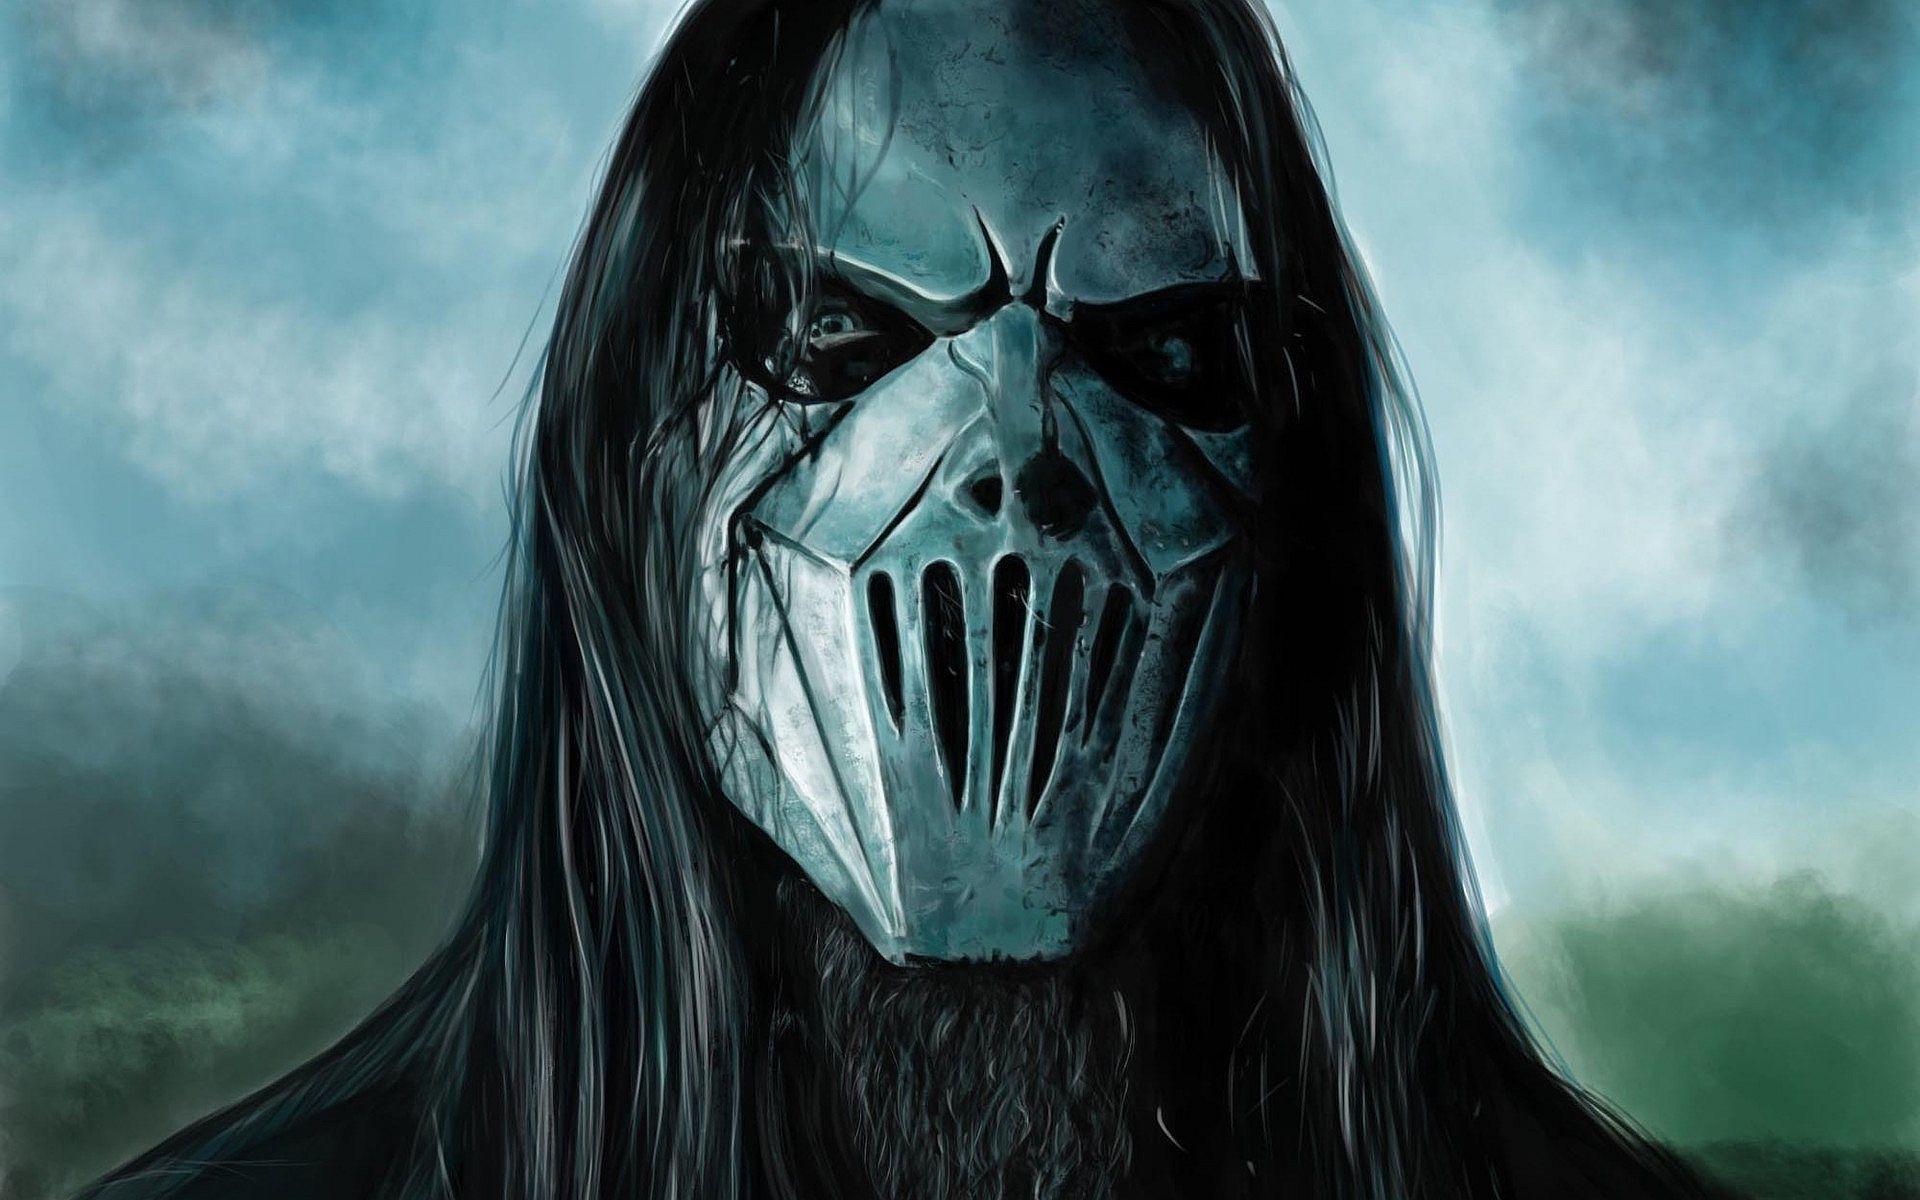 SLIPKNOT&;s Mick Thomson Suffers Stab Wound To Back of The Head